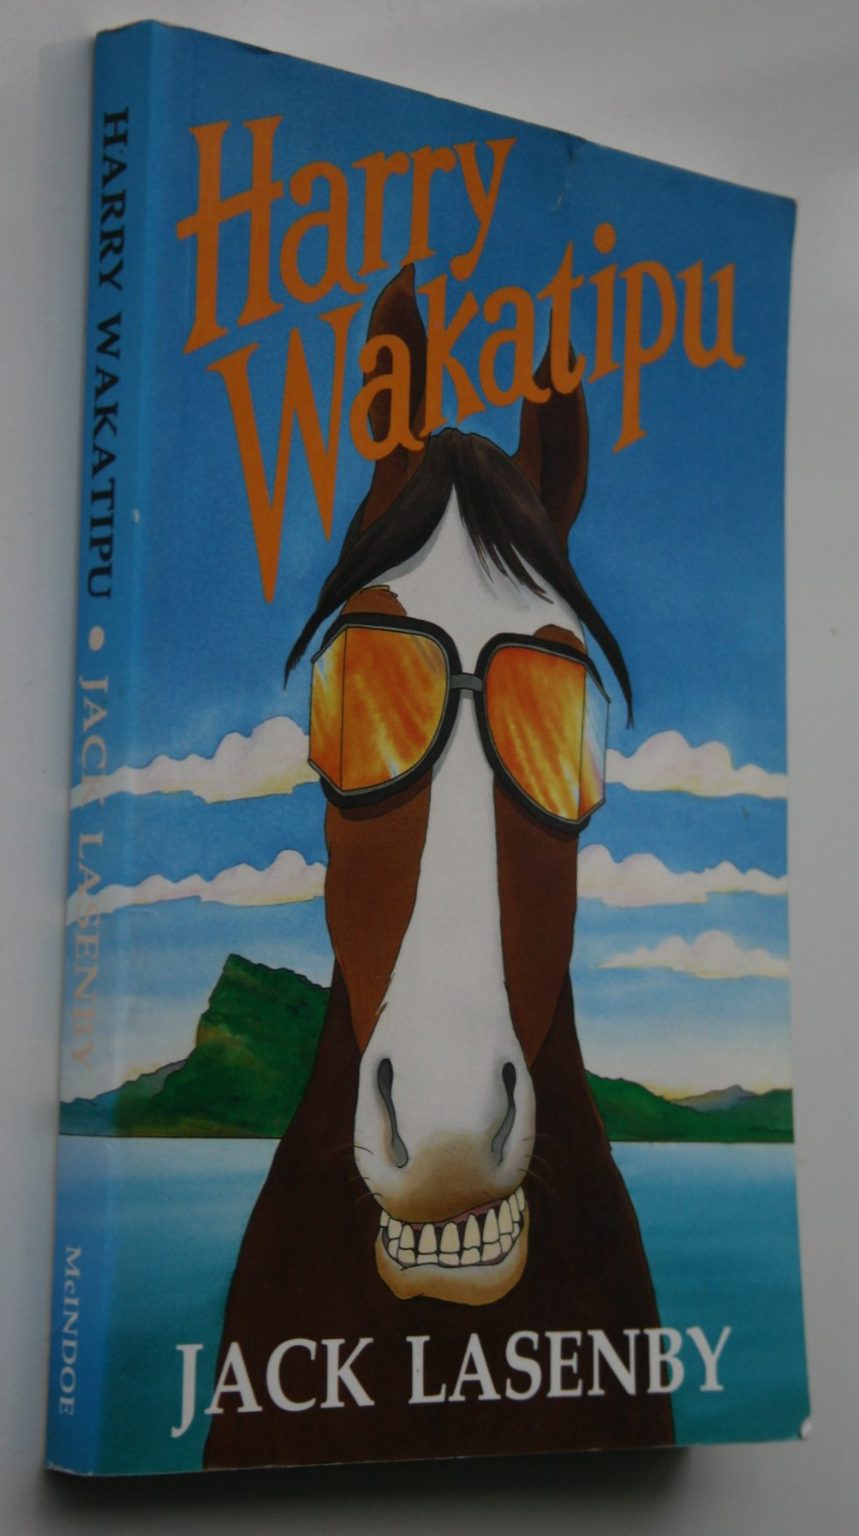 Harry Wakatipu By Jack Lasenby. First Edition. VERY SCARCE.